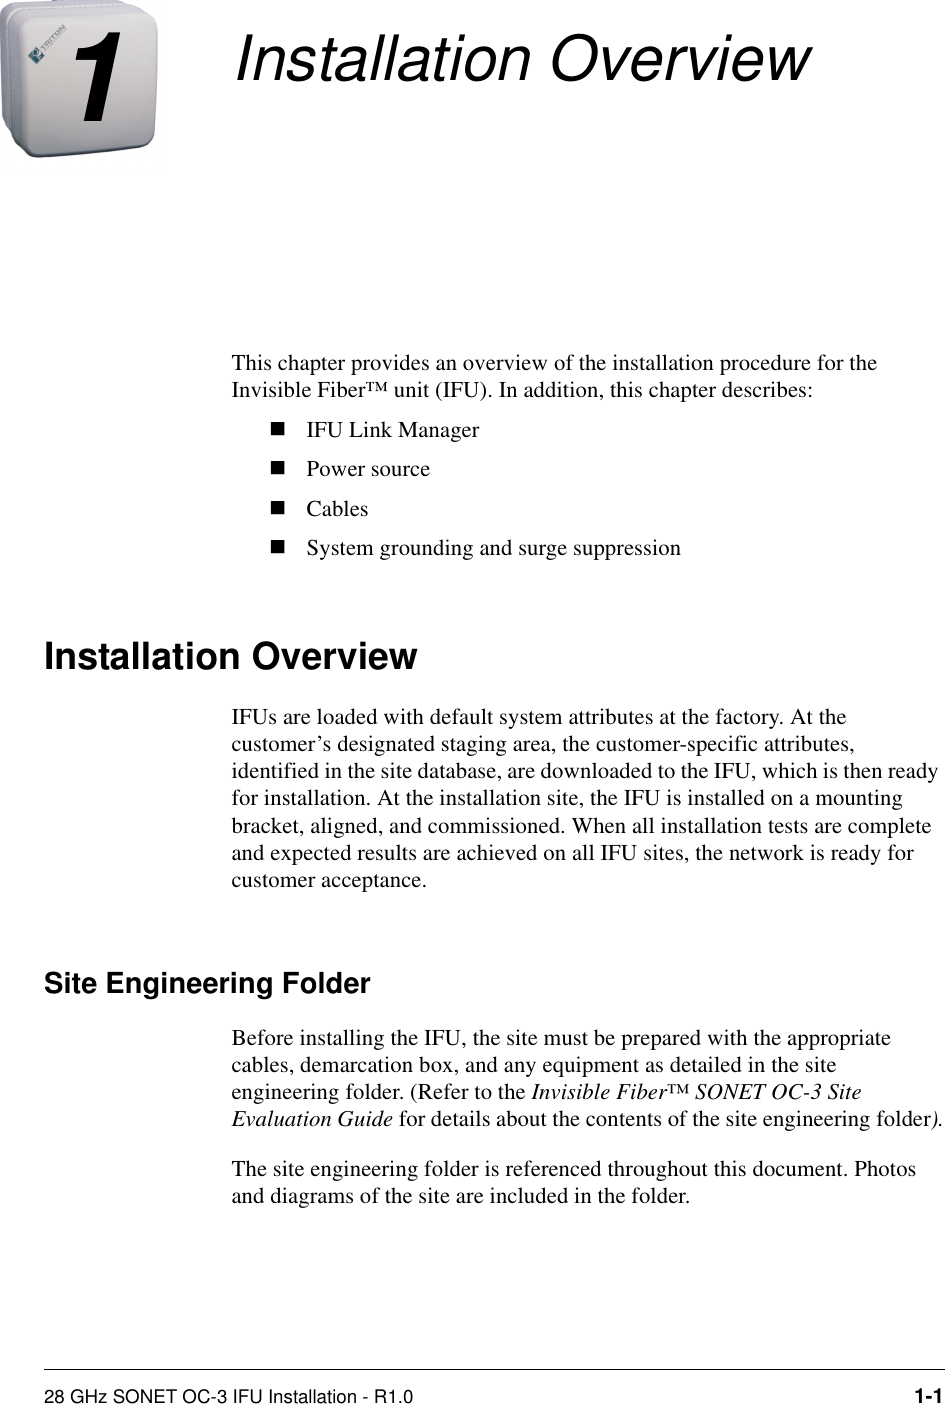 28 GHz SONET OC-3 IFU Installation - R1.0 1-11Installation OverviewThis chapter provides an overview of the installation procedure for the Invisible Fiber™ unit (IFU). In addition, this chapter describes:nIFU Link ManagernPower sourcenCablesnSystem grounding and surge suppression Installation OverviewIFUs are loaded with default system attributes at the factory. At the customer’s designated staging area, the customer-specific attributes, identified in the site database, are downloaded to the IFU, which is then ready for installation. At the installation site, the IFU is installed on a mounting bracket, aligned, and commissioned. When all installation tests are complete and expected results are achieved on all IFU sites, the network is ready for customer acceptance.Site Engineering FolderBefore installing the IFU, the site must be prepared with the appropriate cables, demarcation box, and any equipment as detailed in the site engineering folder. (Refer to the Invisible Fiber™ SONET OC-3 Site Evaluation Guide for details about the contents of the site engineering folder).The site engineering folder is referenced throughout this document. Photos and diagrams of the site are included in the folder. 